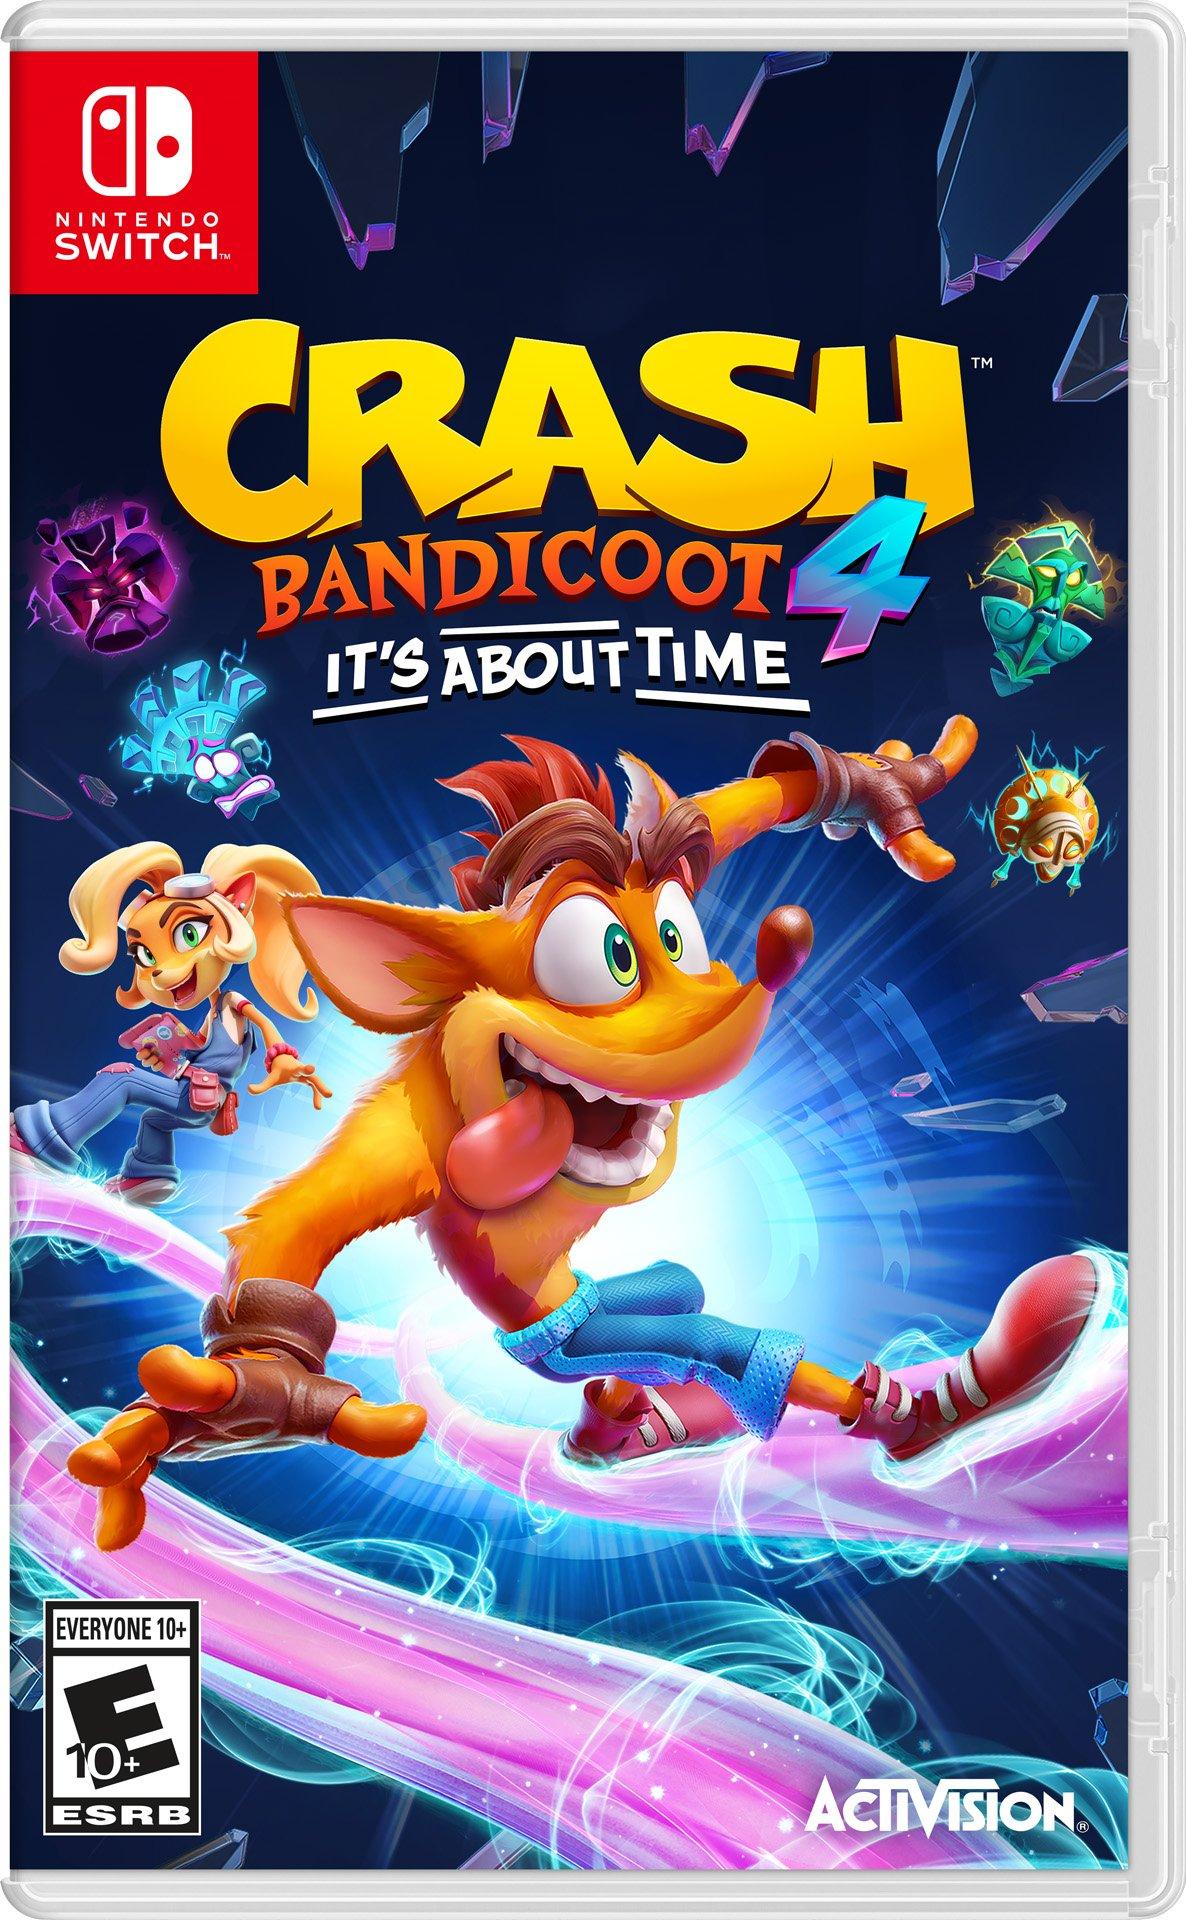 GameStop　4:　Crash　About　Bandicoot　PS4　PlayStation　It's　Time